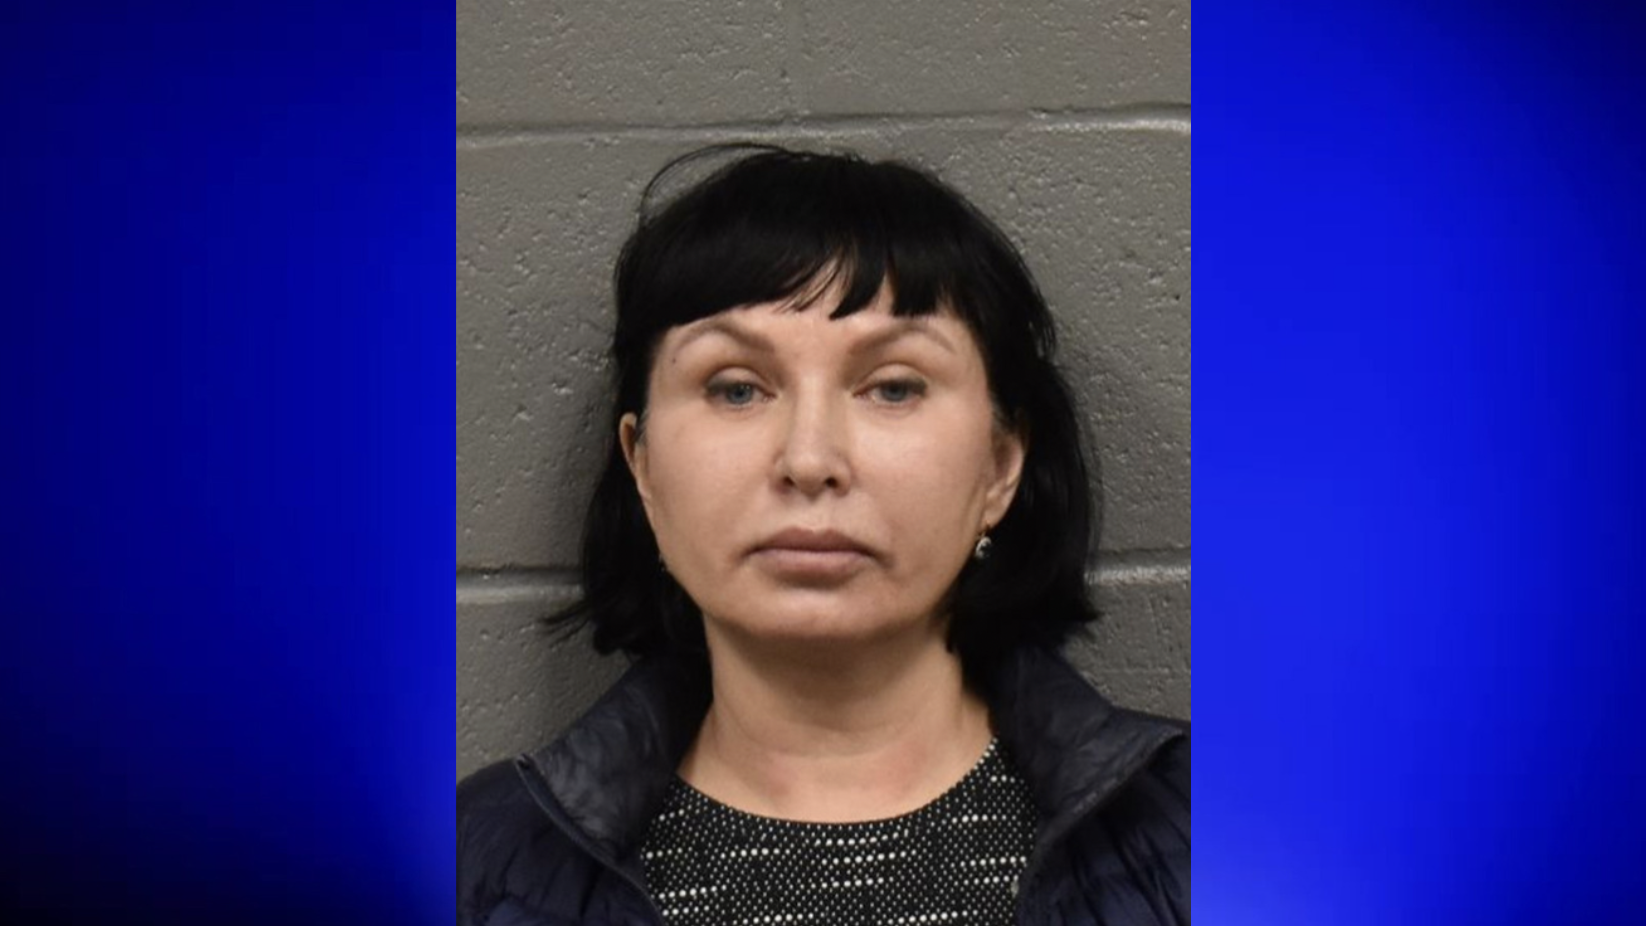 Homewood cops arrest Russian woman for giving illegal Botox injections